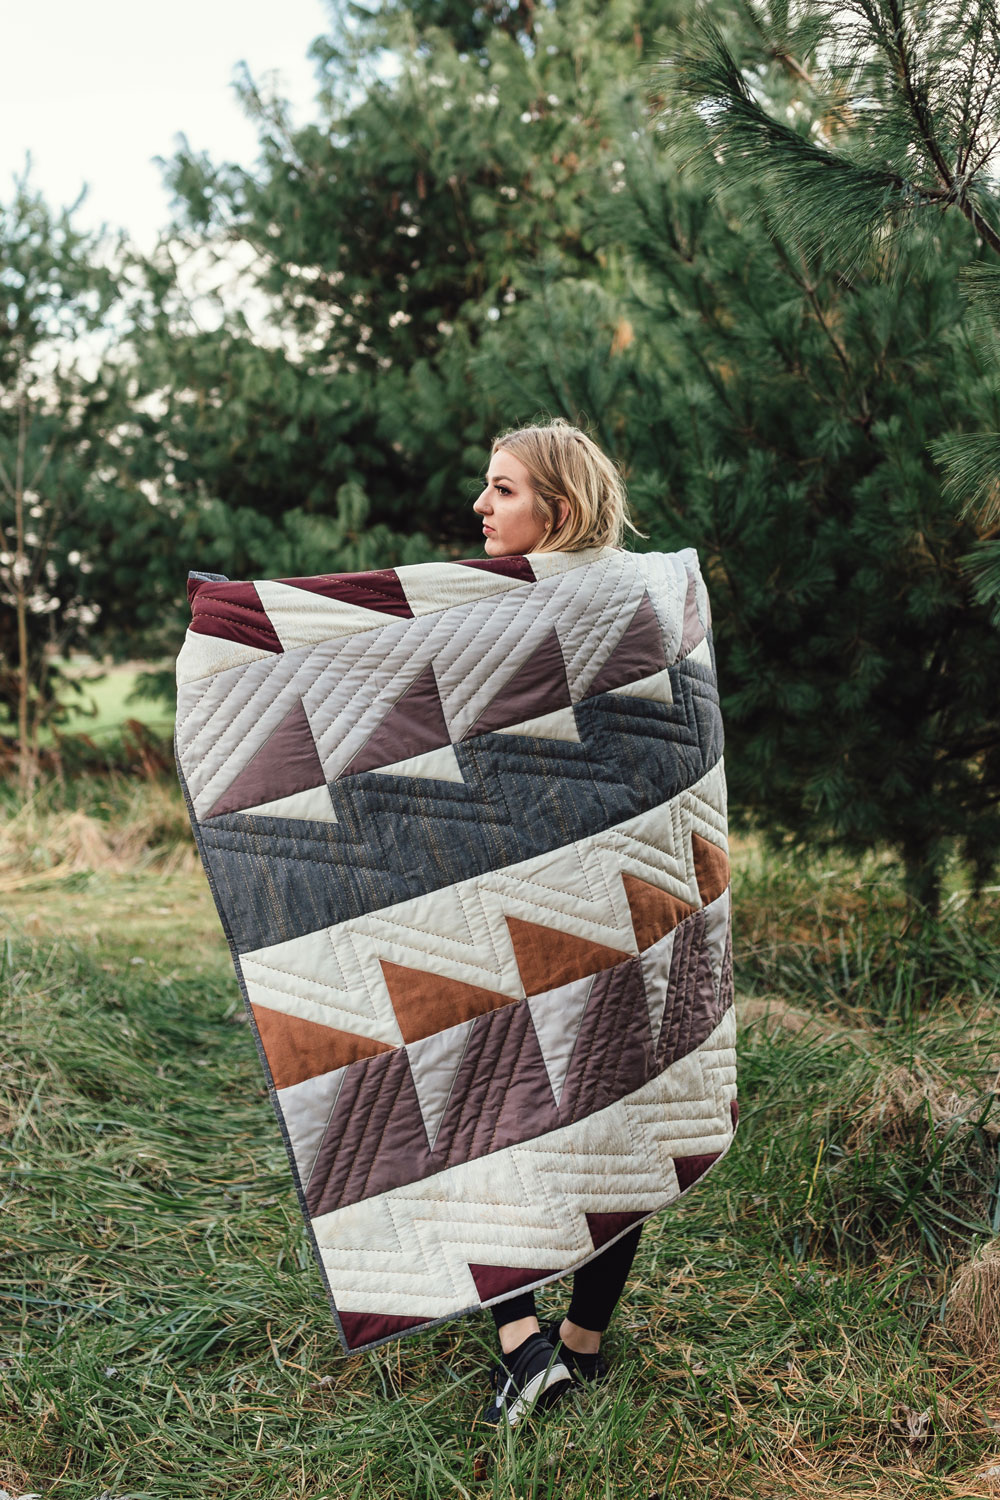 How to hand quilt in 3 easy steps! In this blog and video tutorial I'll list out all of the supplies you need and show you how simple hand quilting can be. Get this Bayside Quilt pattern and make your own!